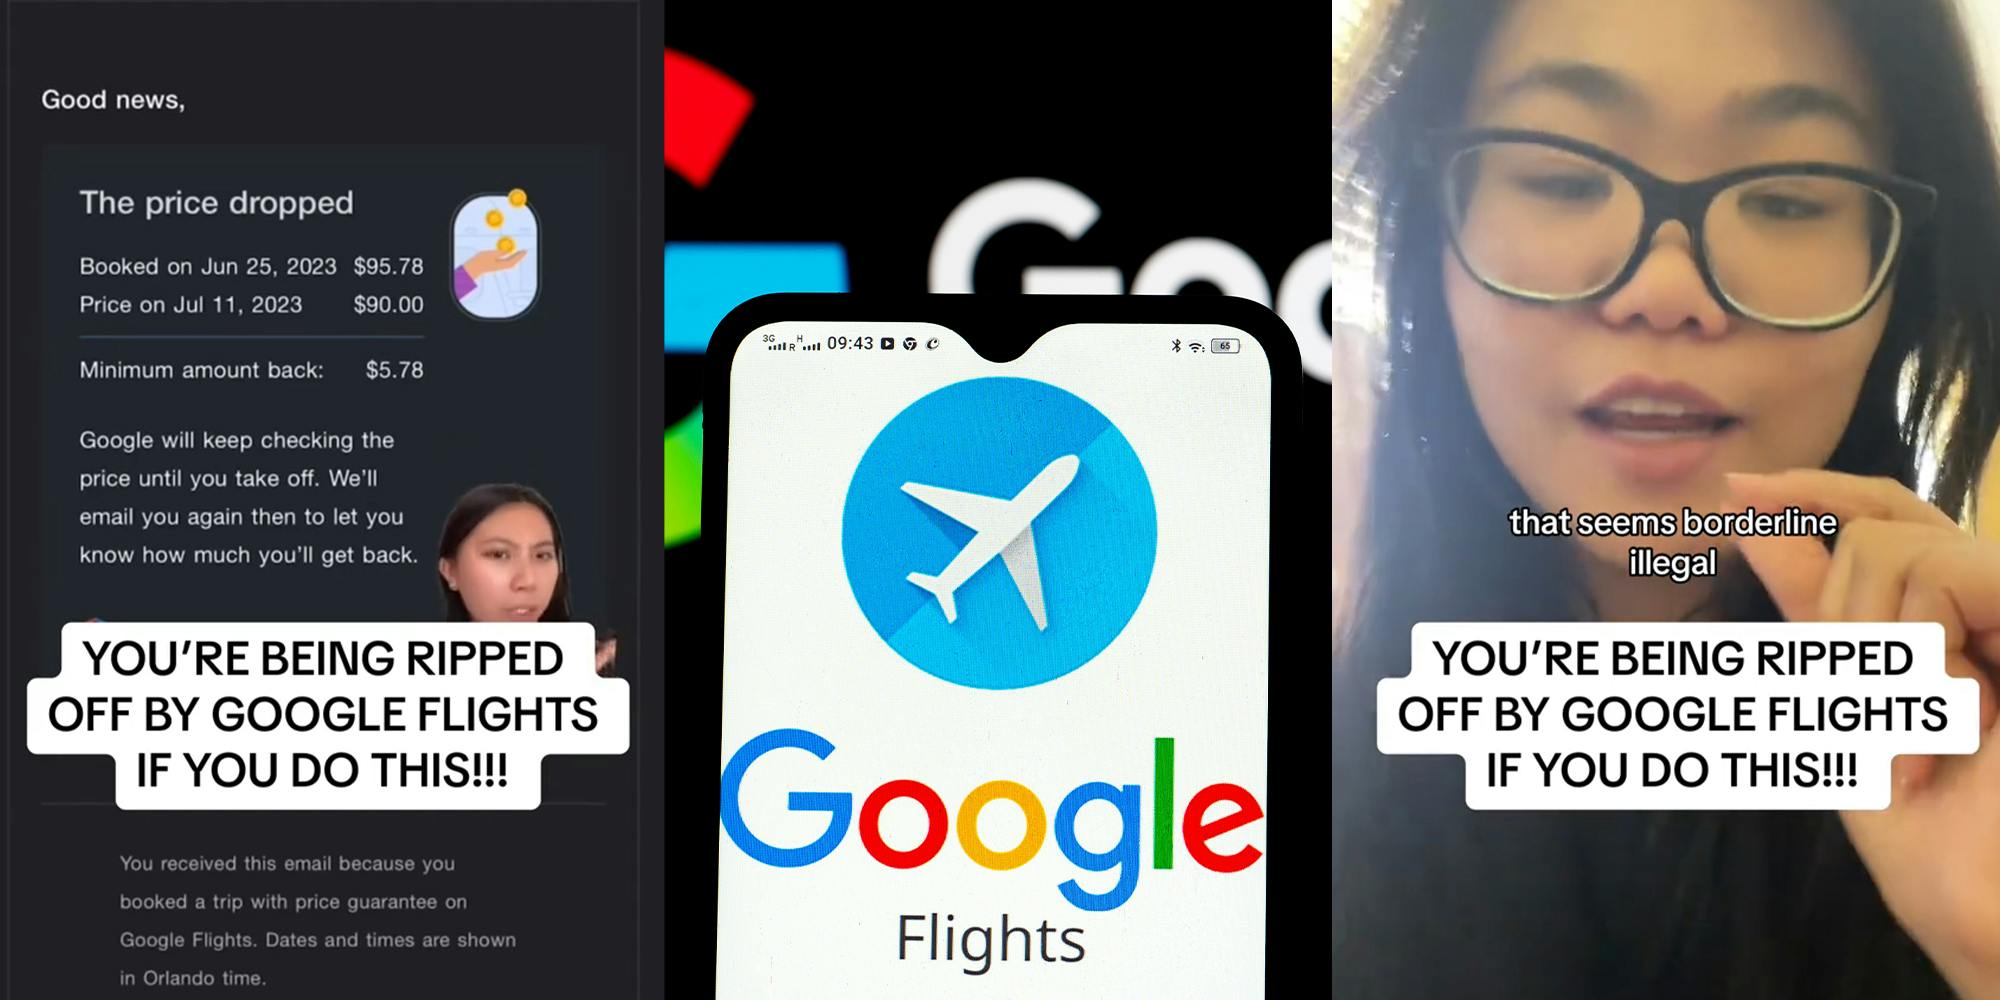 Woman explains how google flights is ripping people off